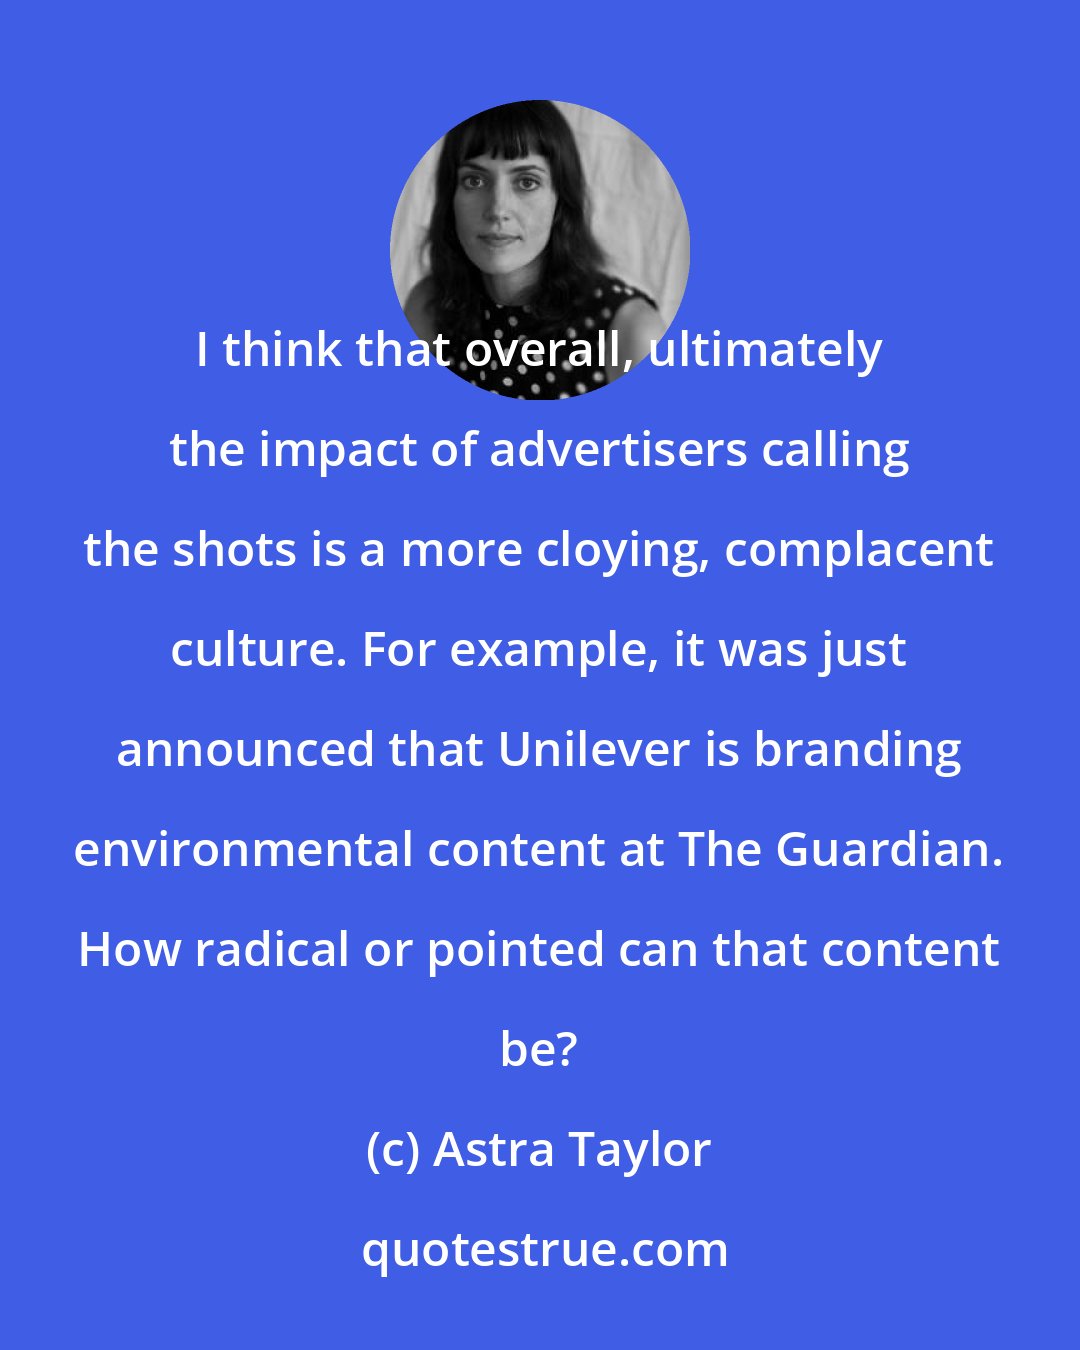 Astra Taylor: I think that overall, ultimately the impact of advertisers calling the shots is a more cloying, complacent culture. For example, it was just announced that Unilever is branding environmental content at The Guardian. How radical or pointed can that content be?